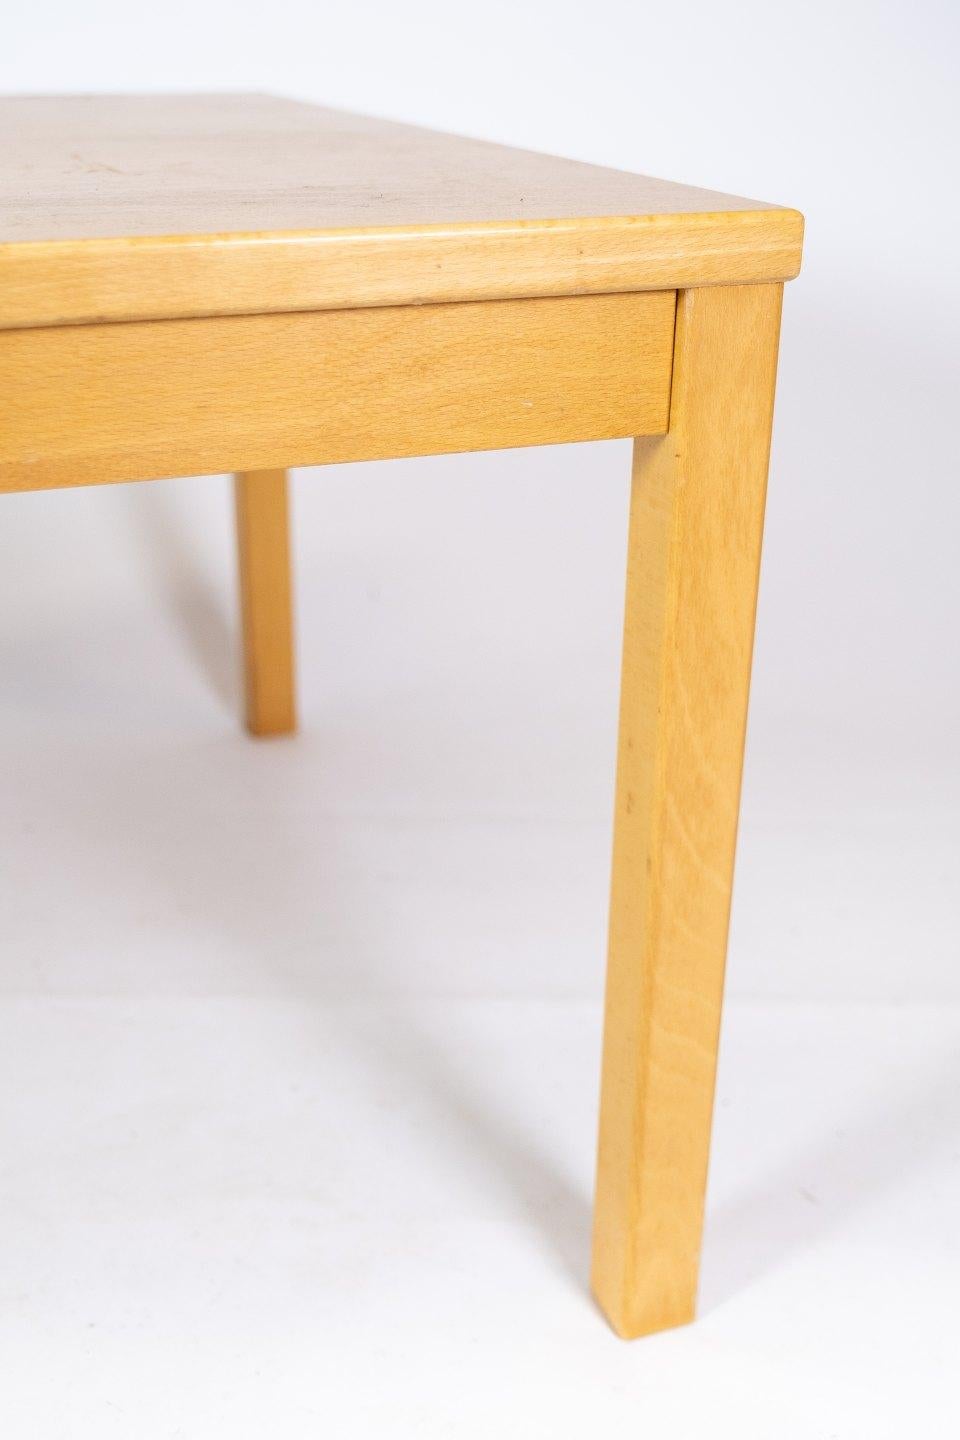 Scandinavian Modern Coffee Table in Beech of Danish Design from the 1960s For Sale